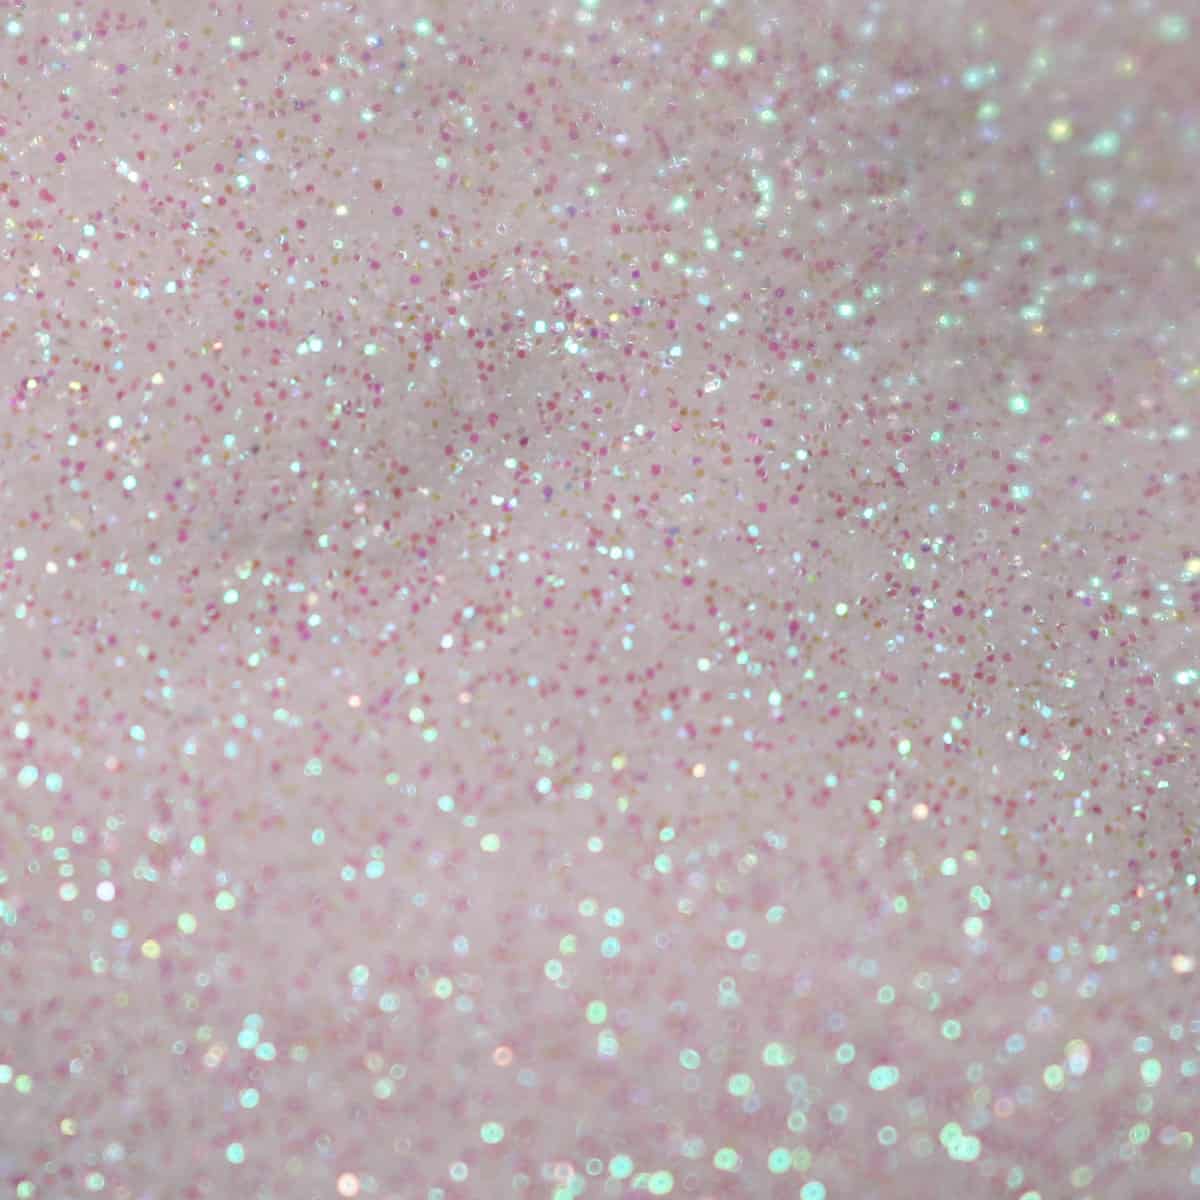 Fine white glitter with pink accents